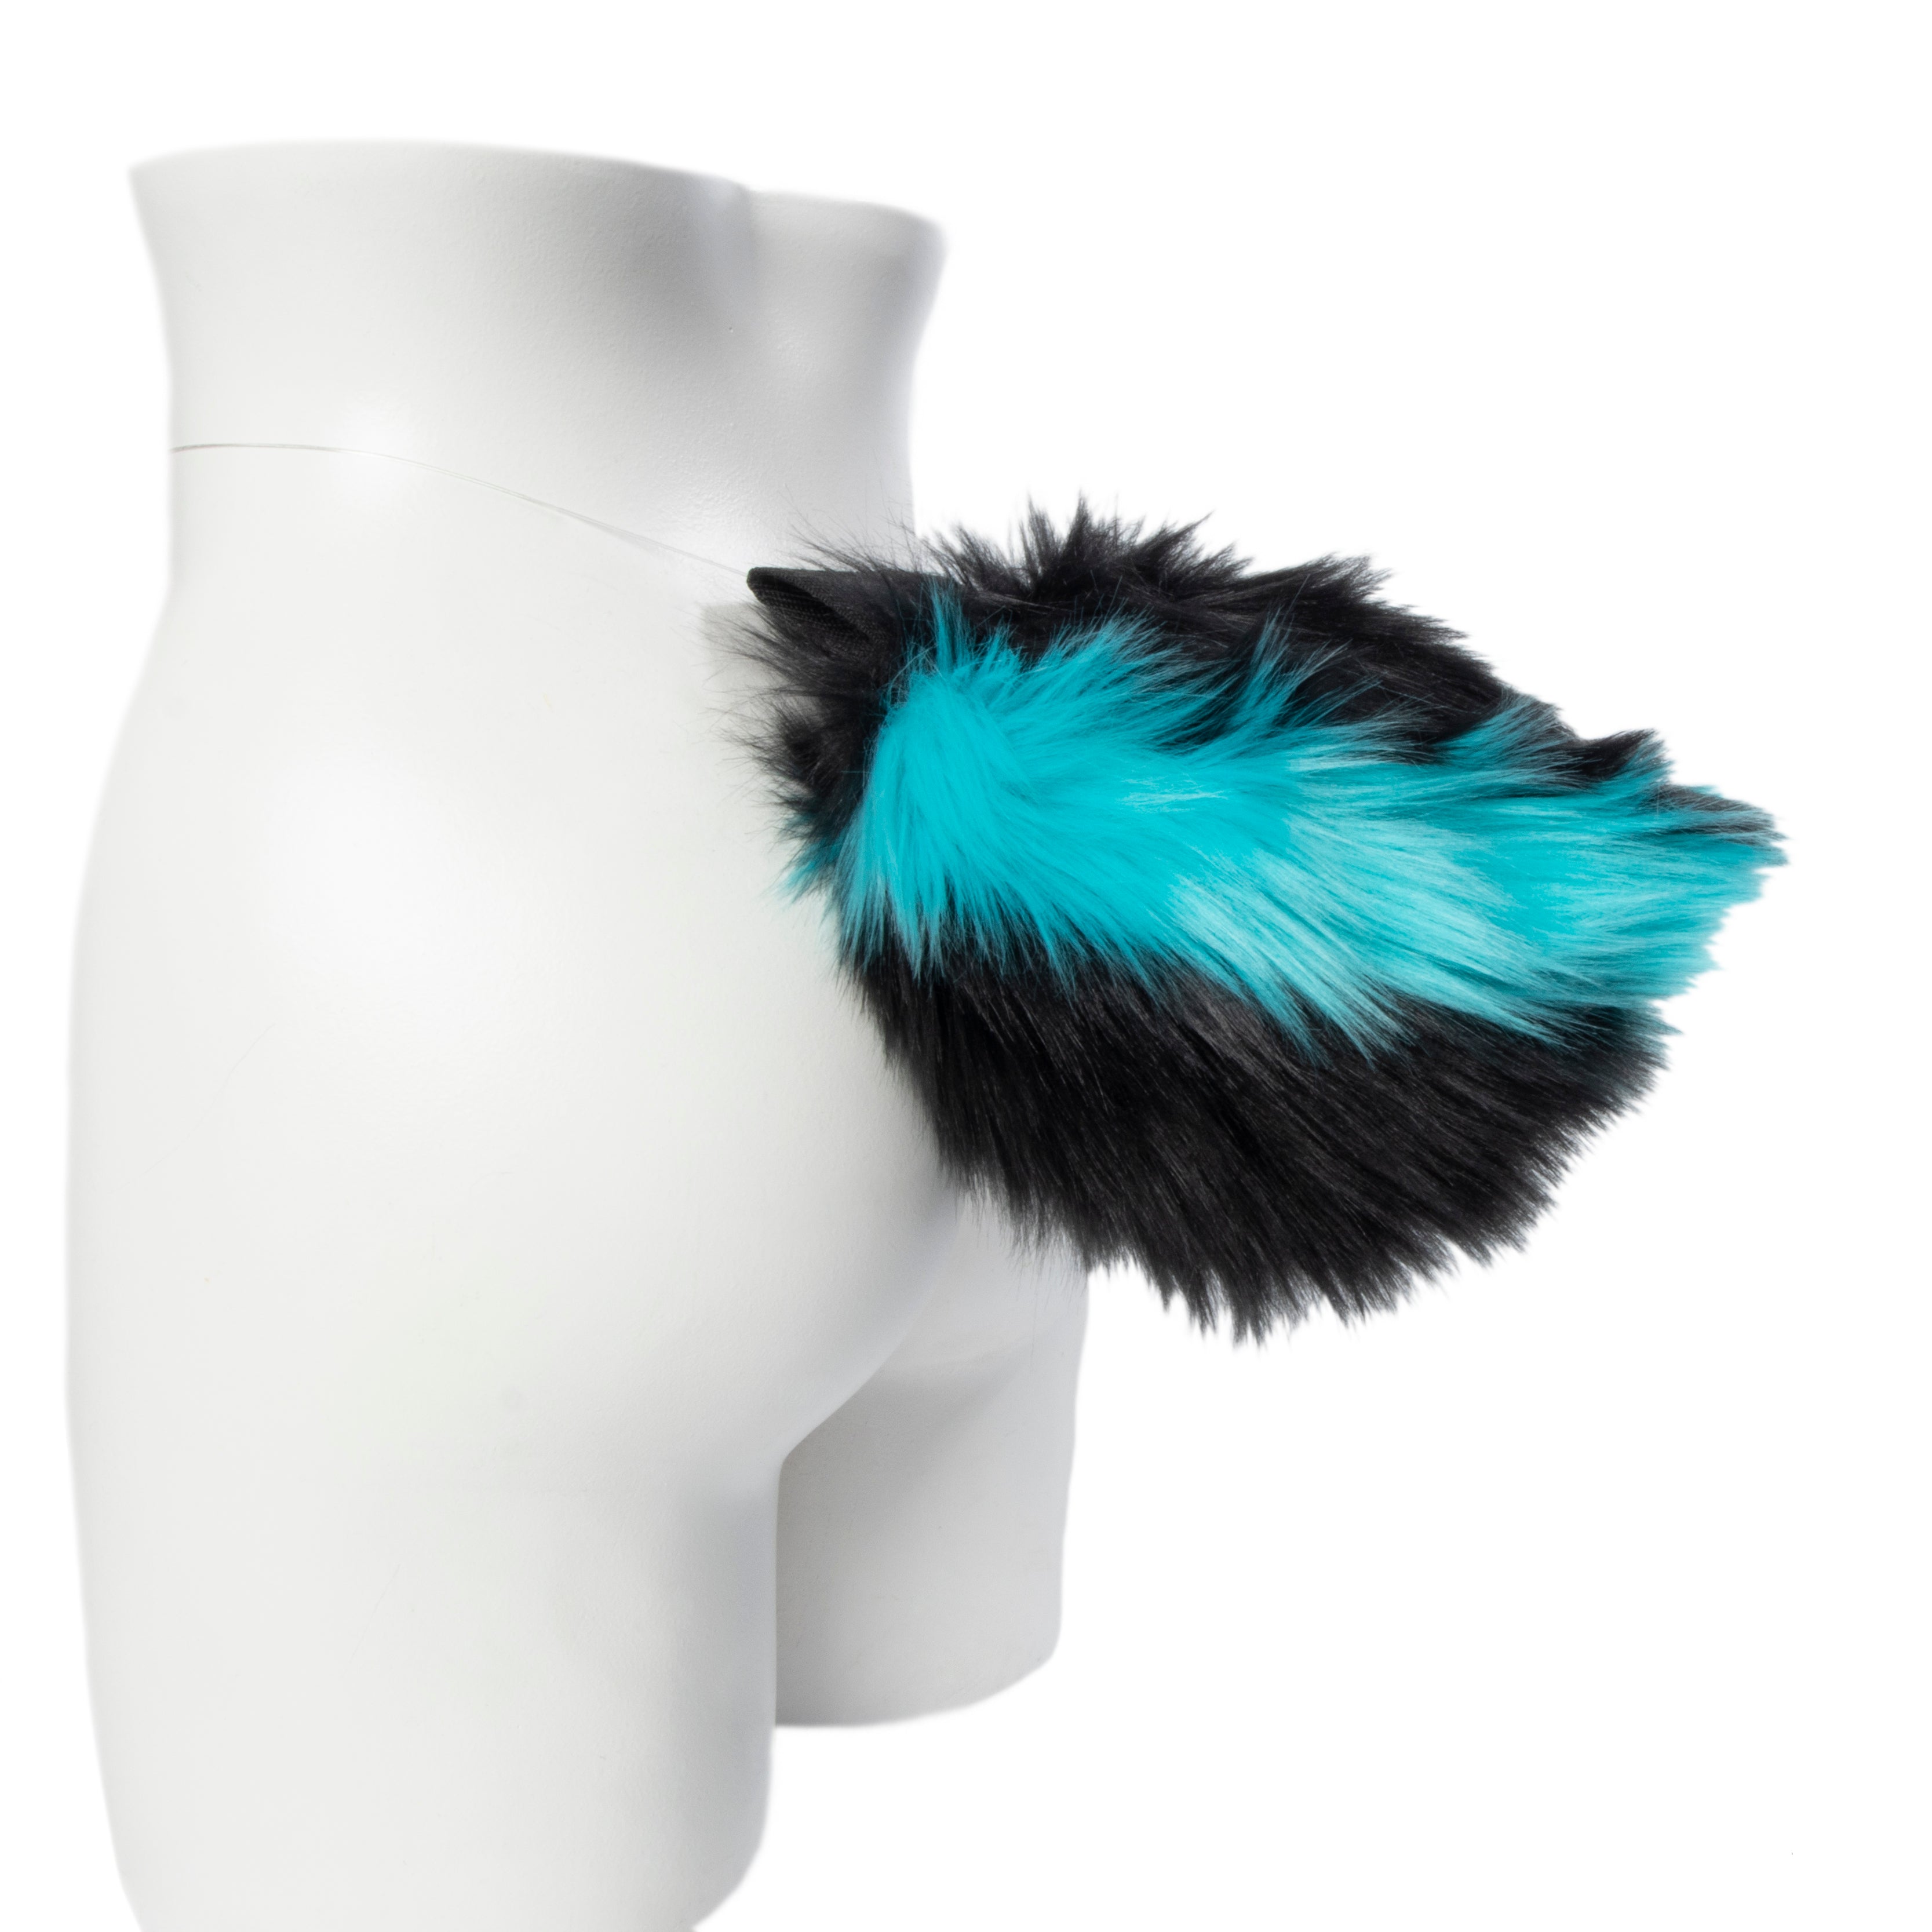 turquoise  Pawstar Bunny Plus Tail. Faux fur furry rabbit costume tail.